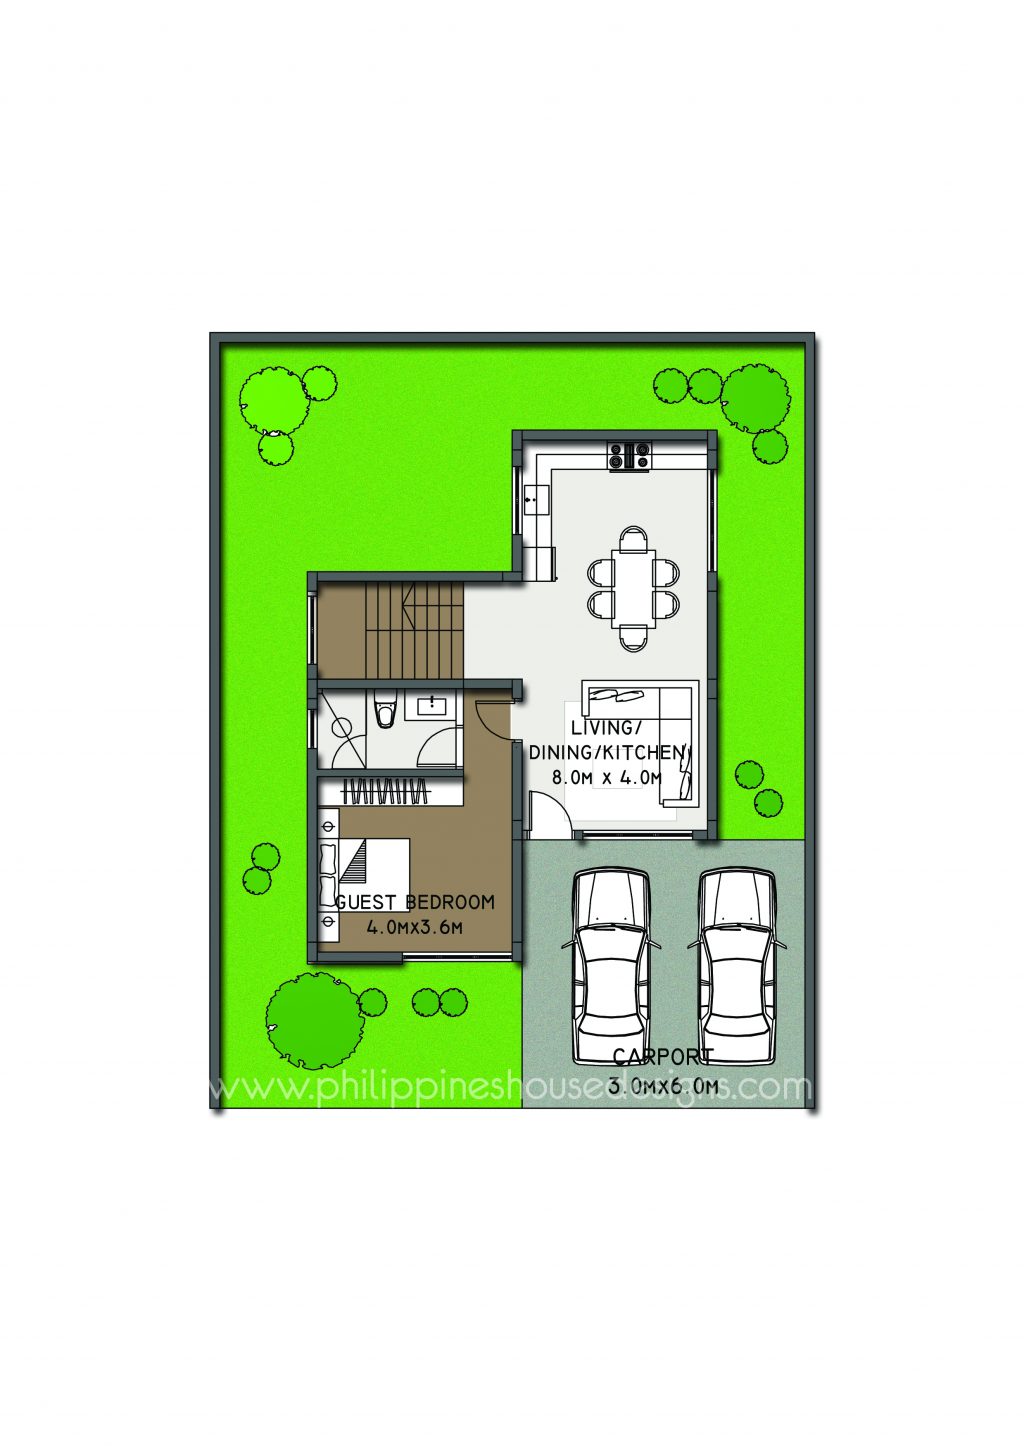 house design in philippines with floor plan Home Design House Design In Philippines With Floor Plan